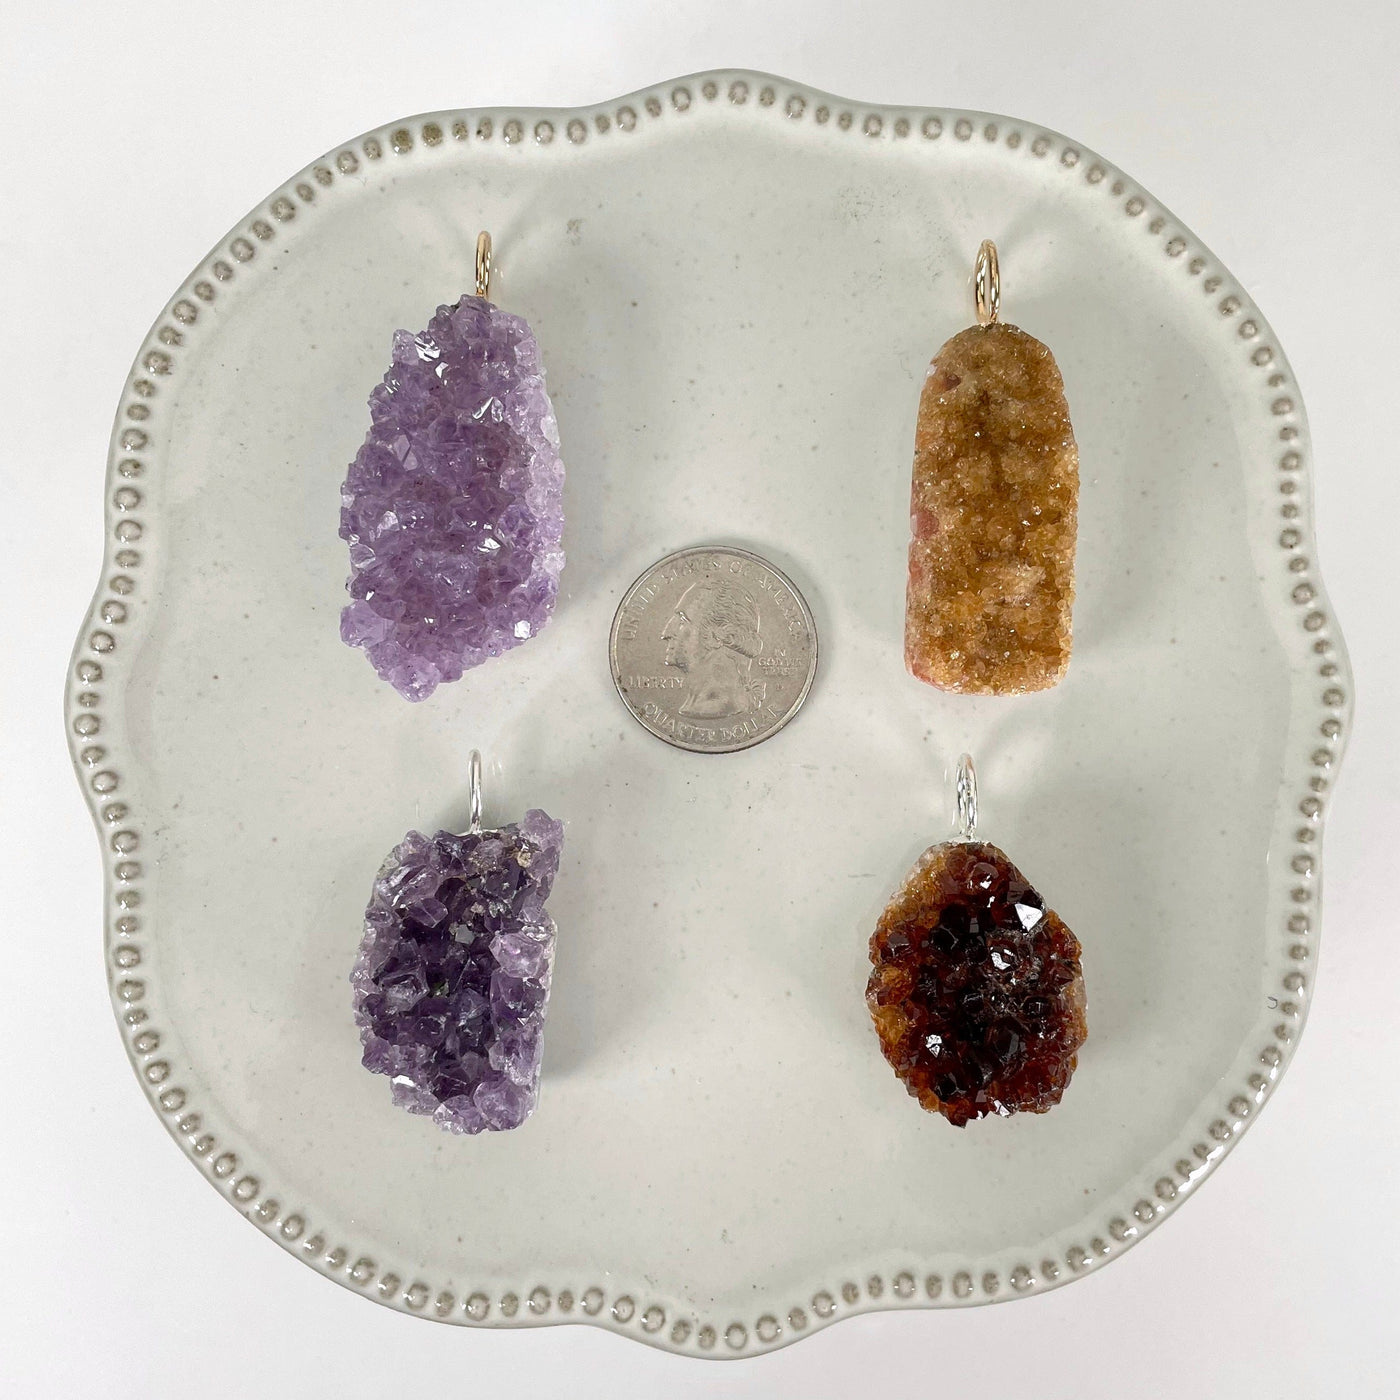 one of each amethyst druzy cluster pendant options on display with a quarter for size reference